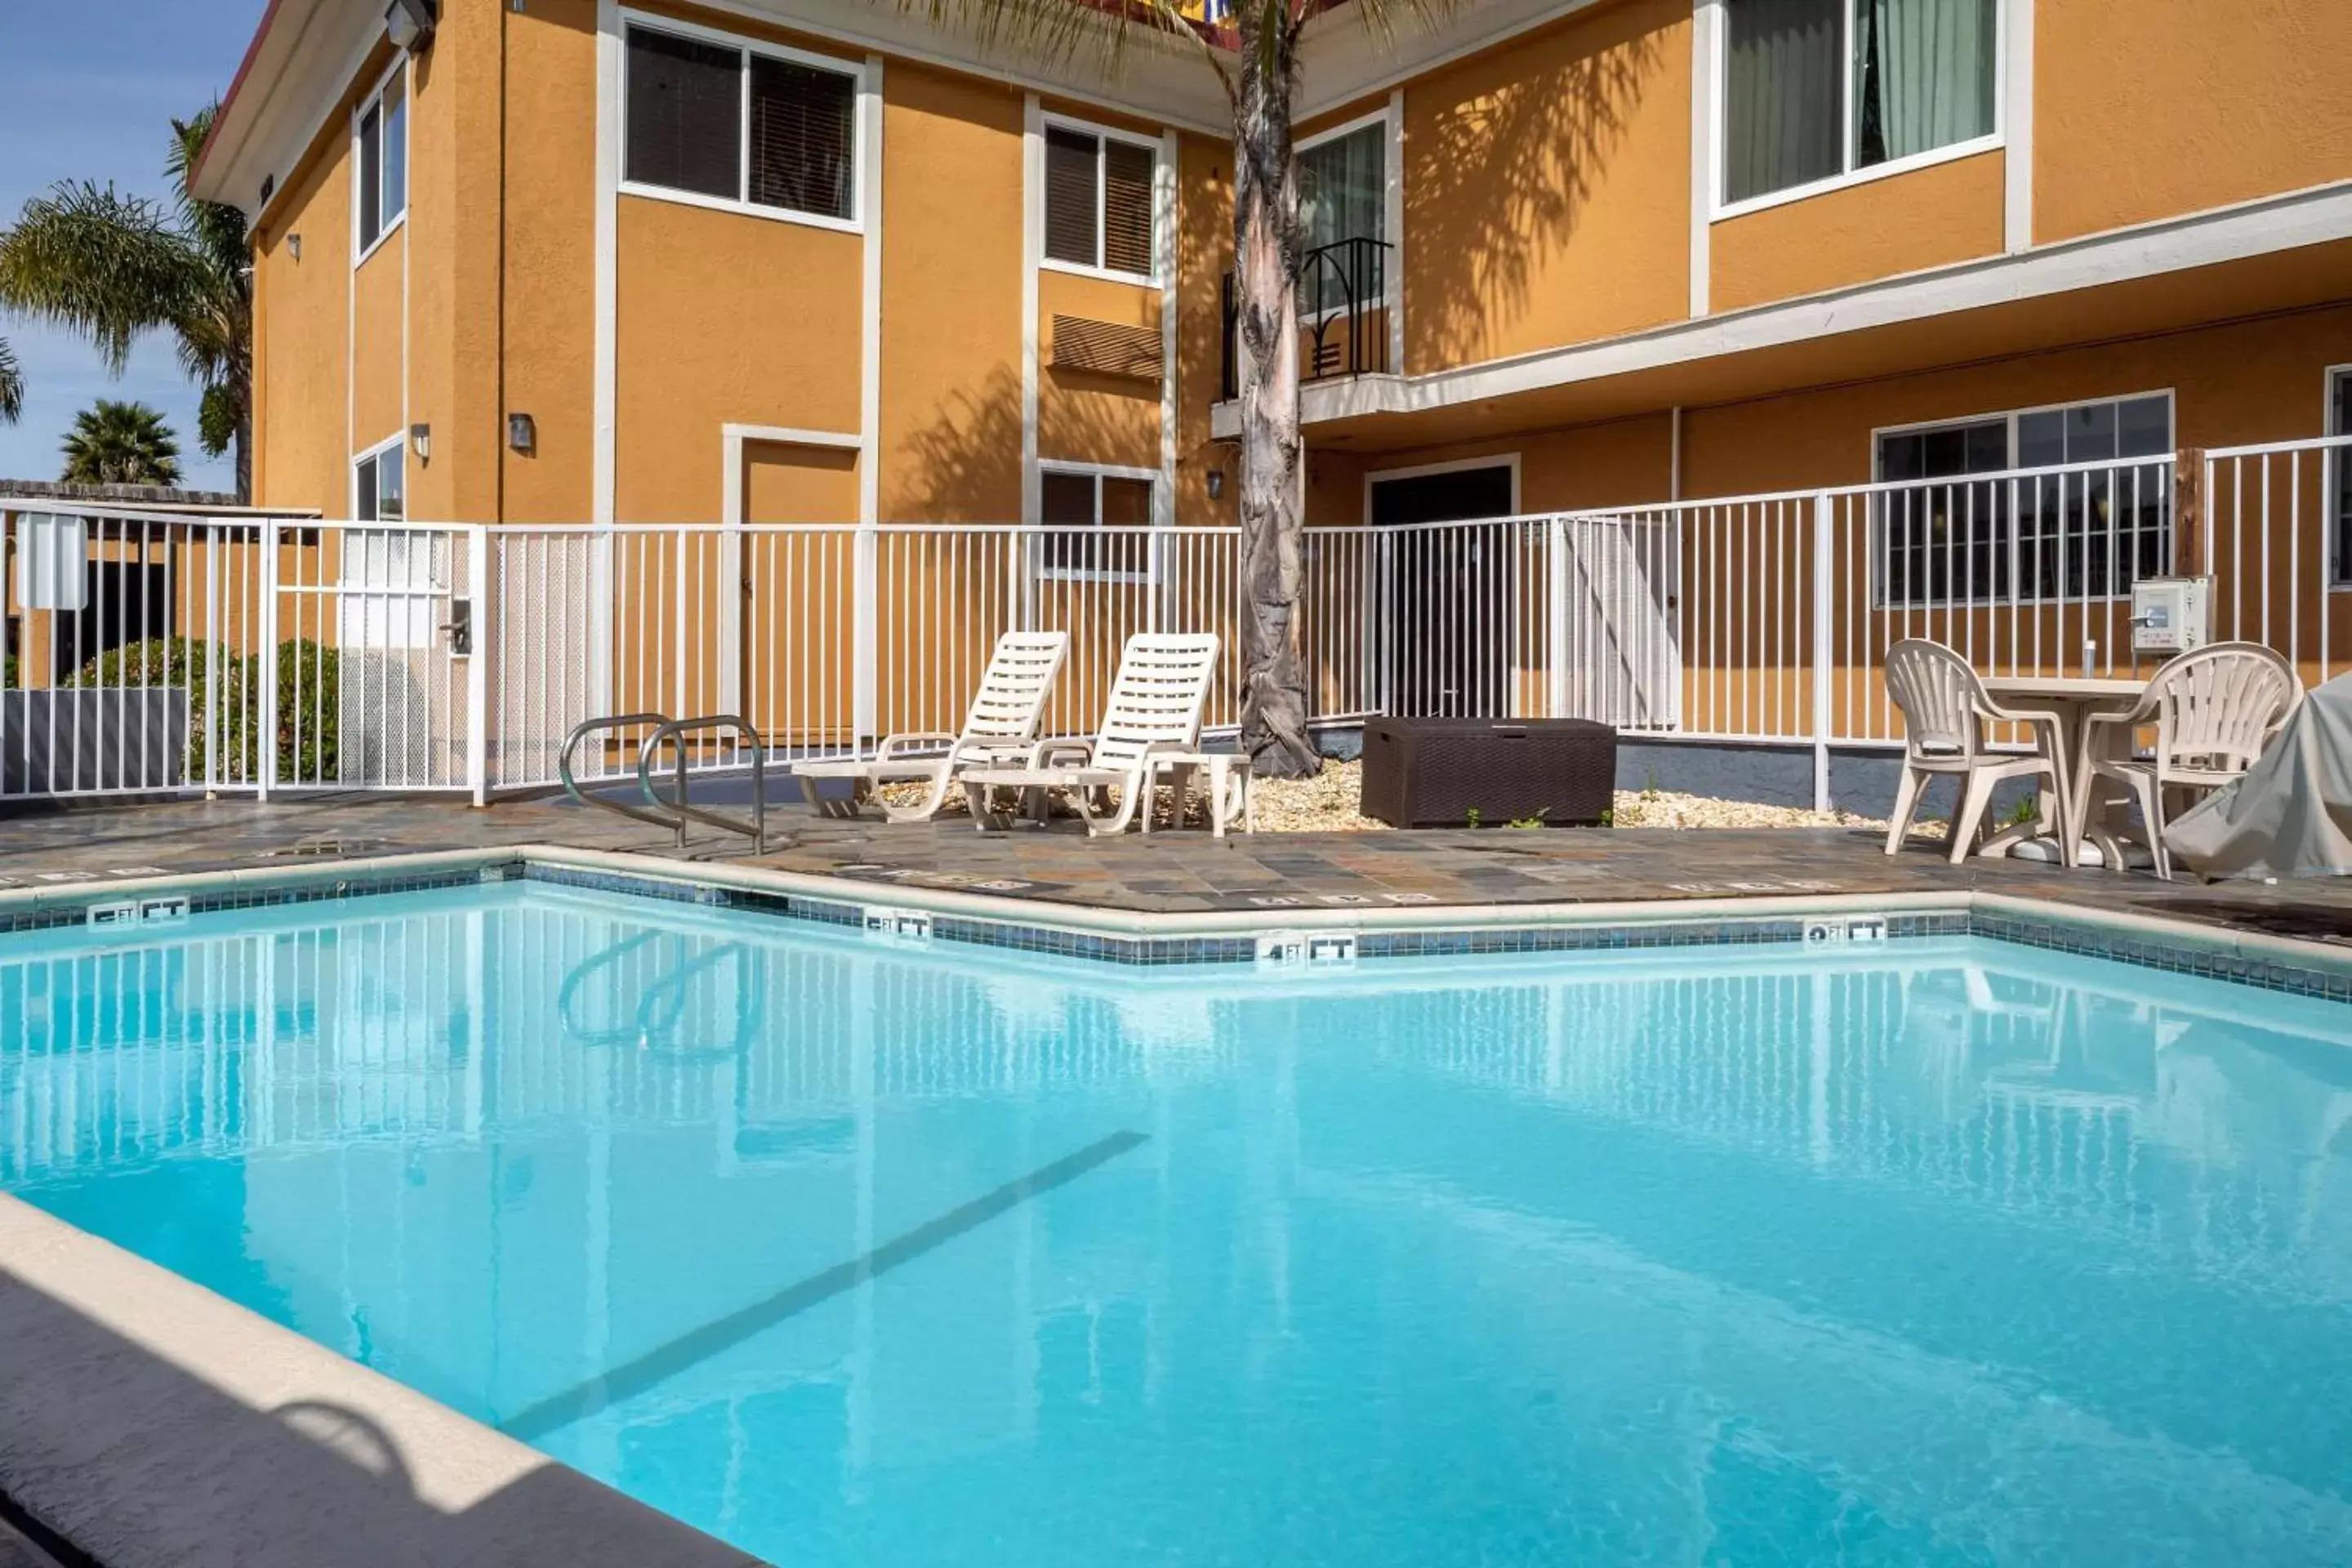 On site, Swimming Pool in Comfort Inn Castro Valley